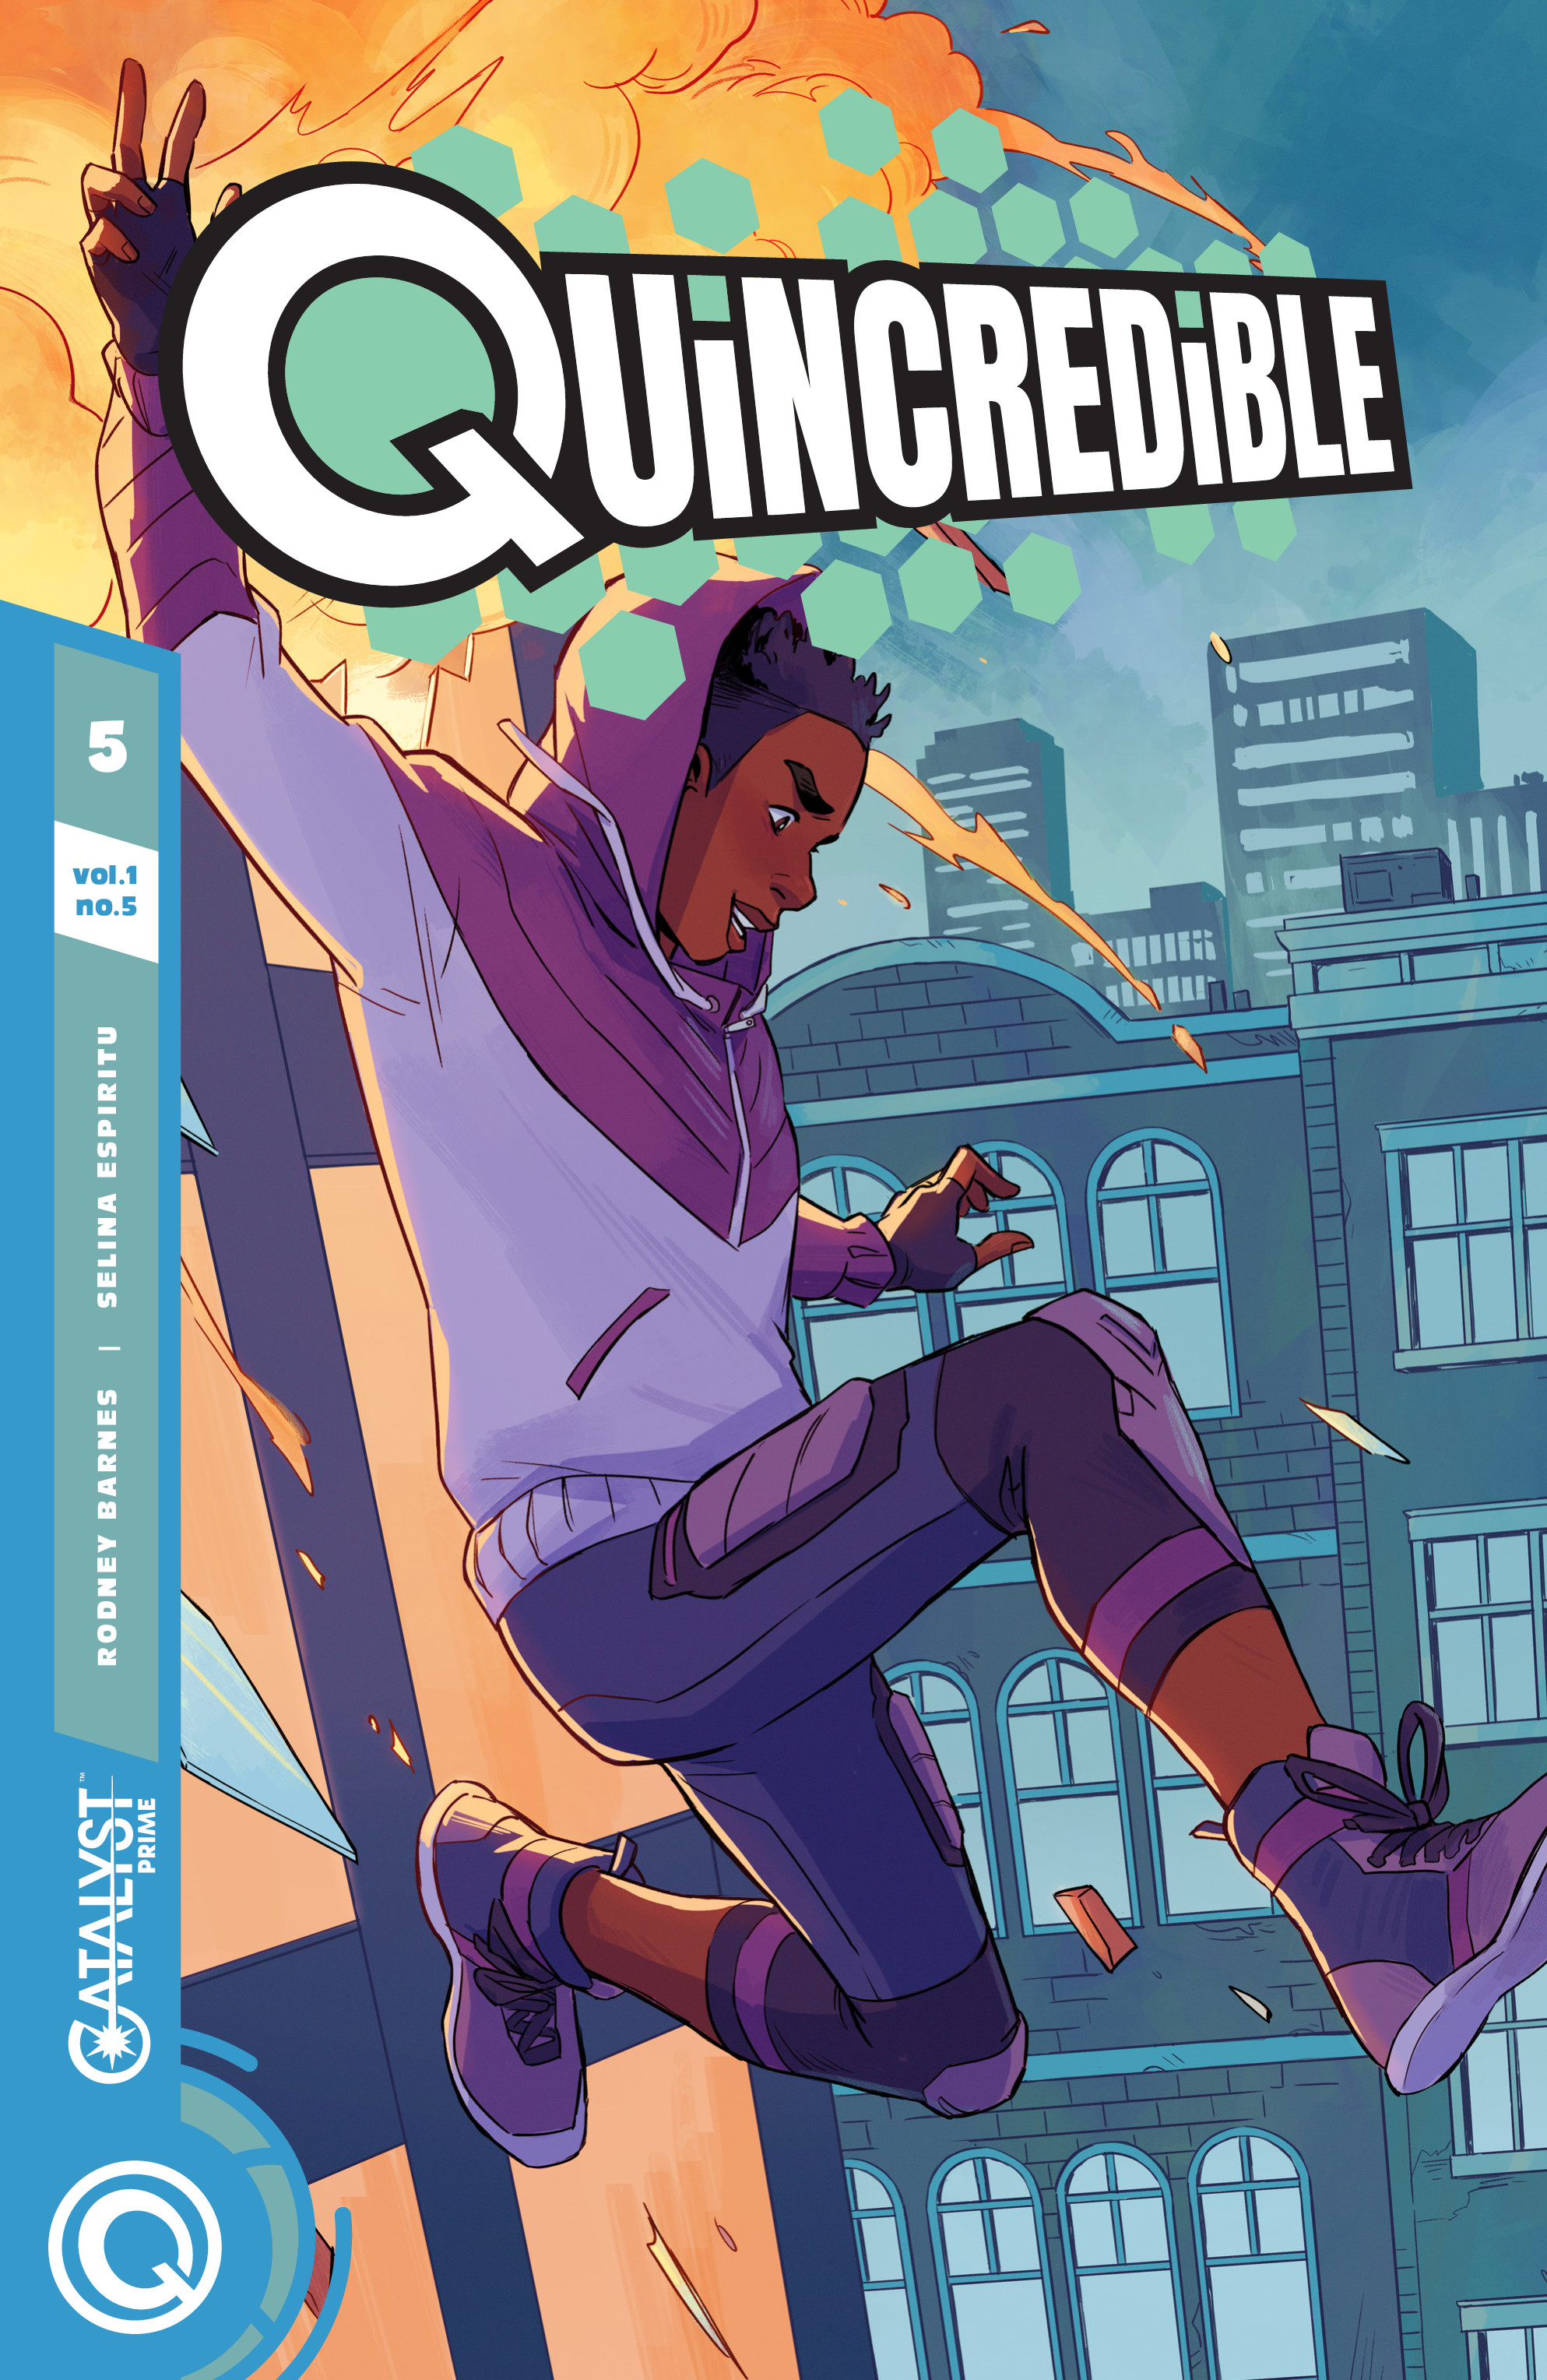 Read online Quincredible comic -  Issue #5 - 1